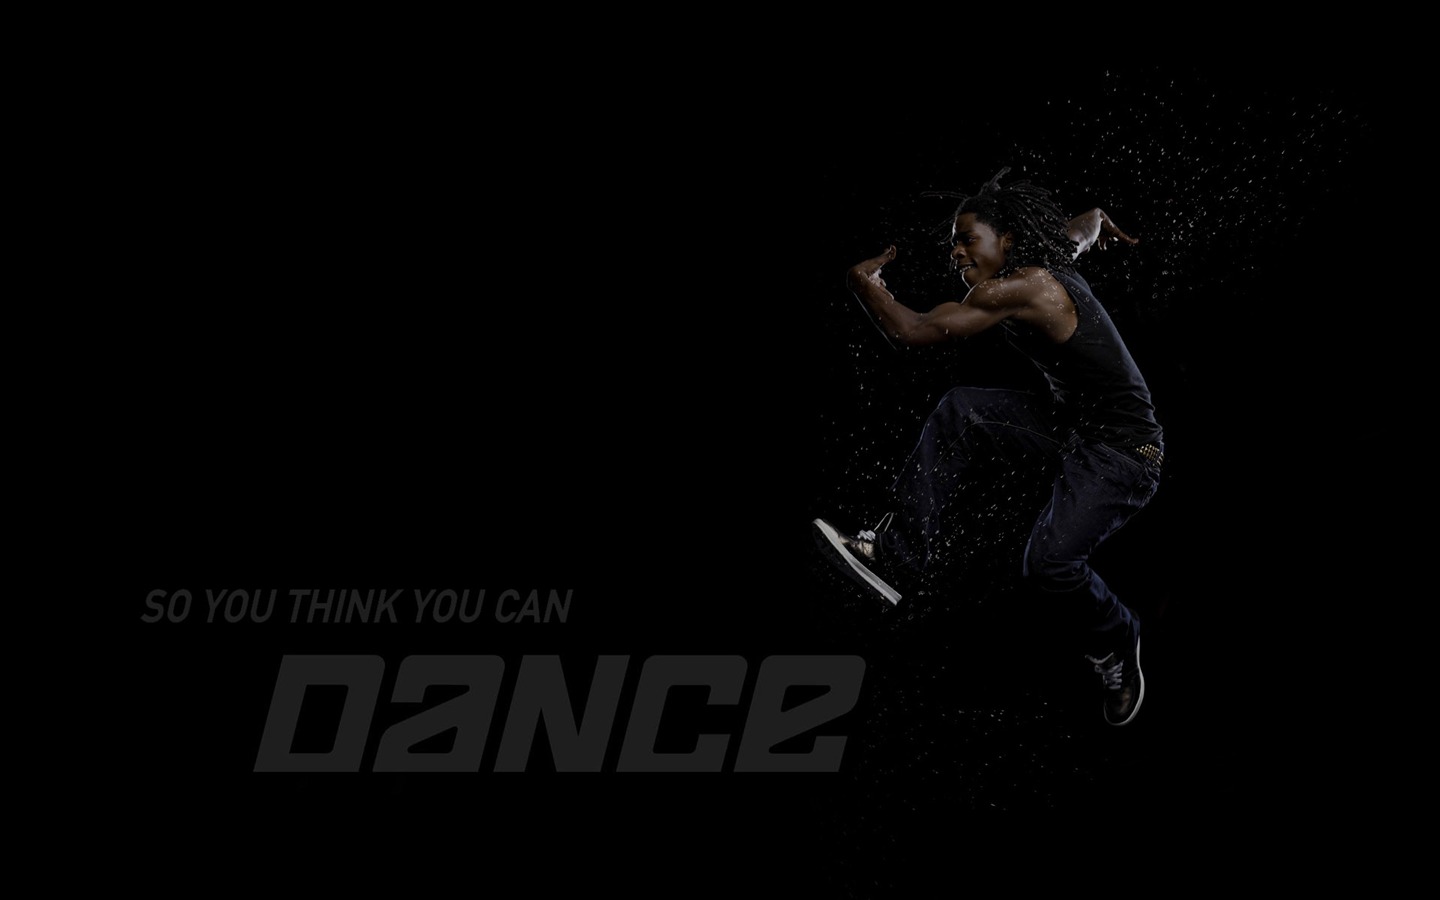 So You Think You Can Dance 舞林争霸 壁纸(二)16 - 1440x900